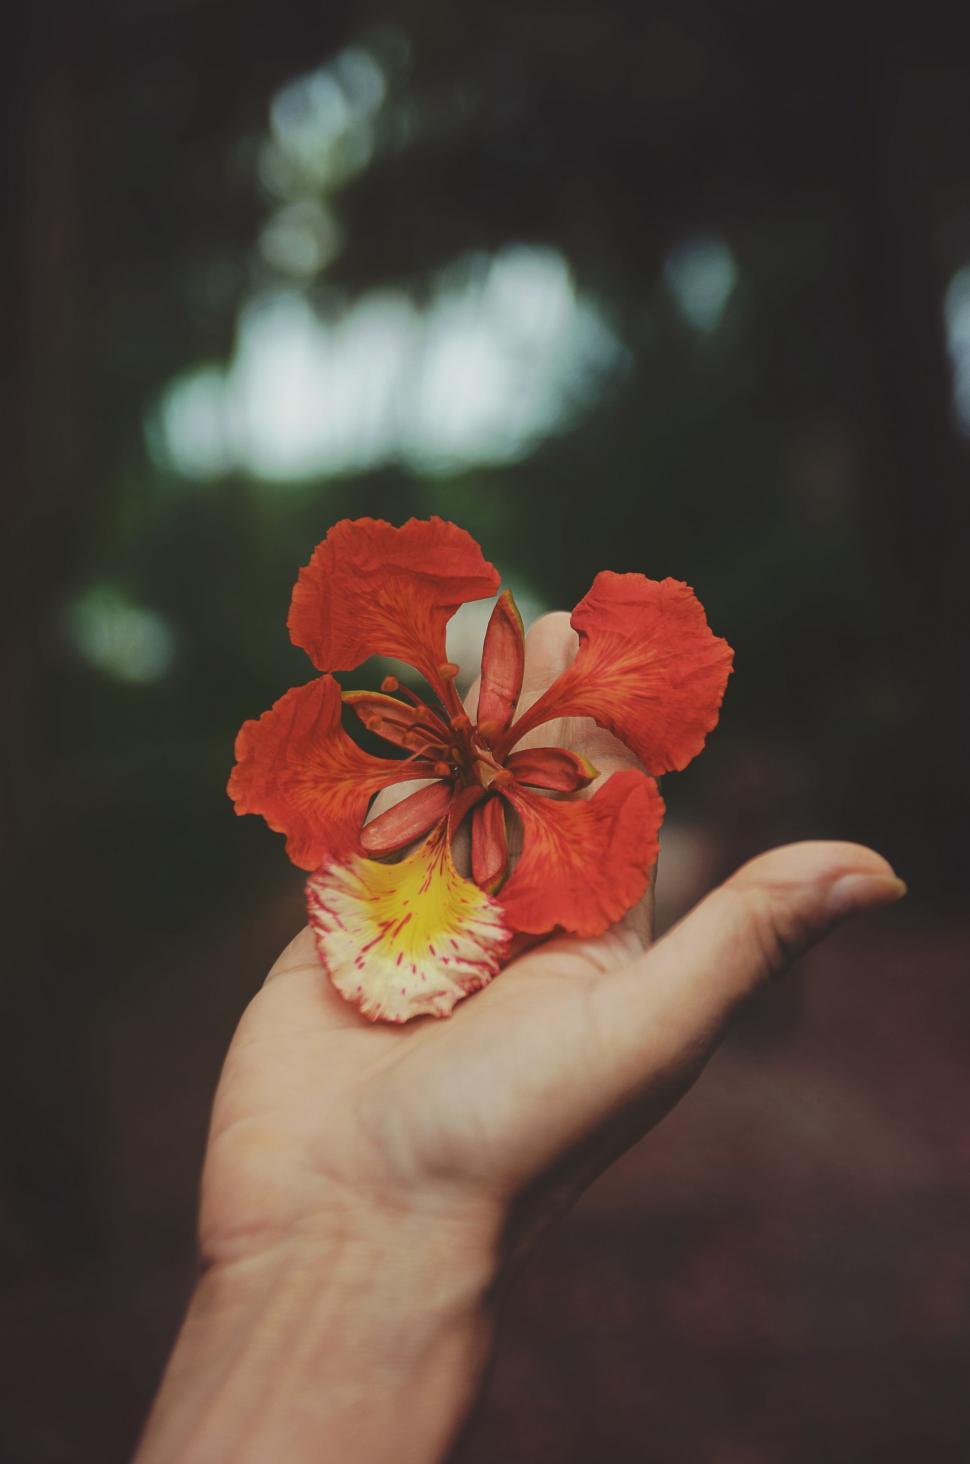 Free Image of Person Holding a Flower 